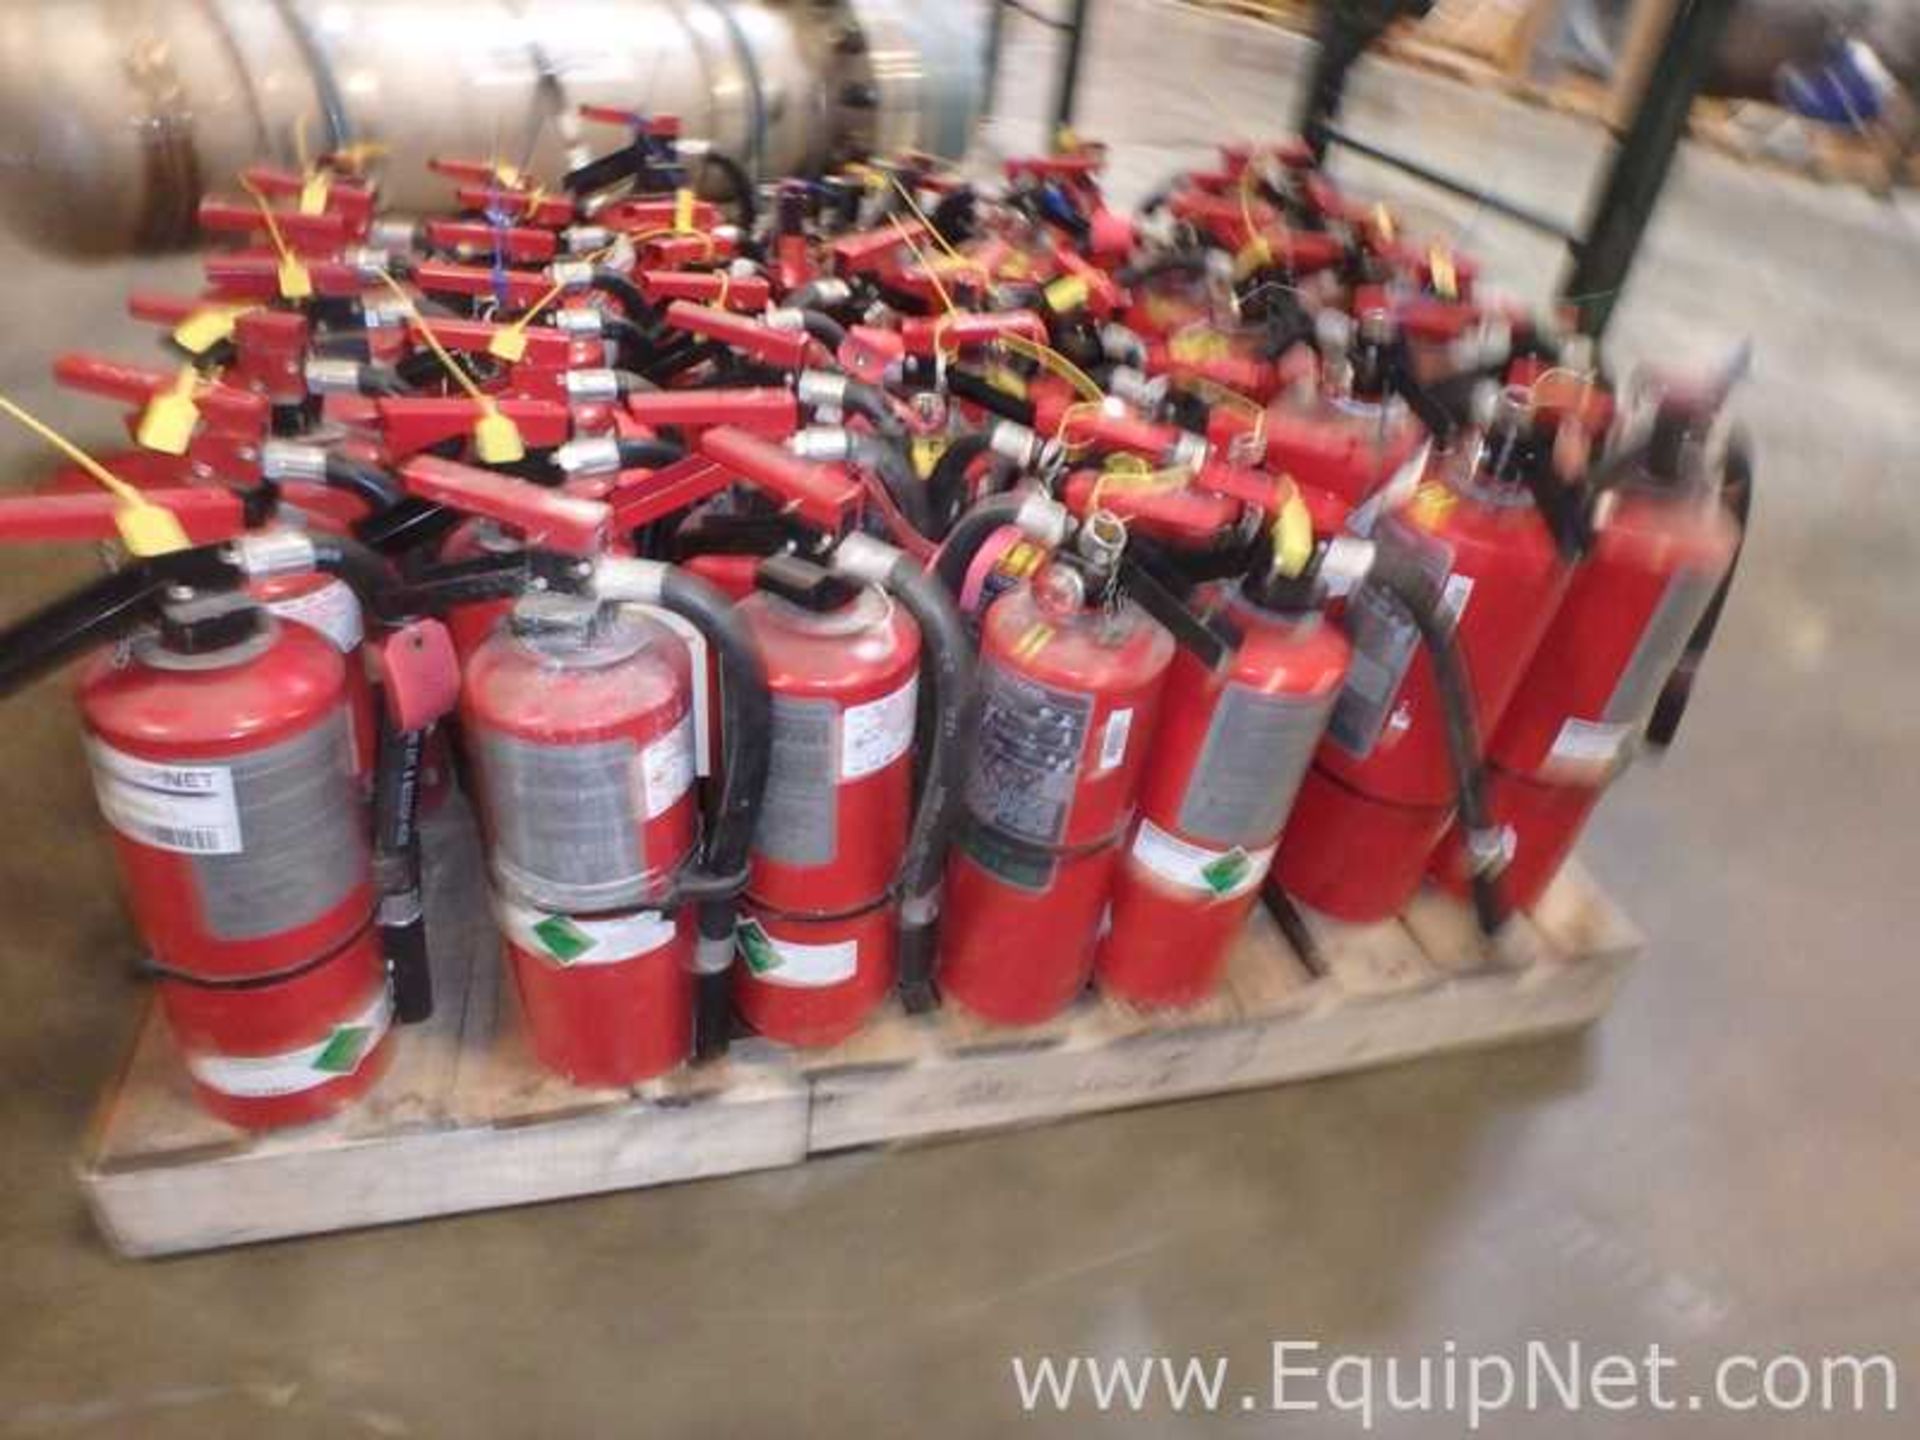 Lot of Approximately 40 Ansul Sentry Fire Extinguishers - Image 2 of 4